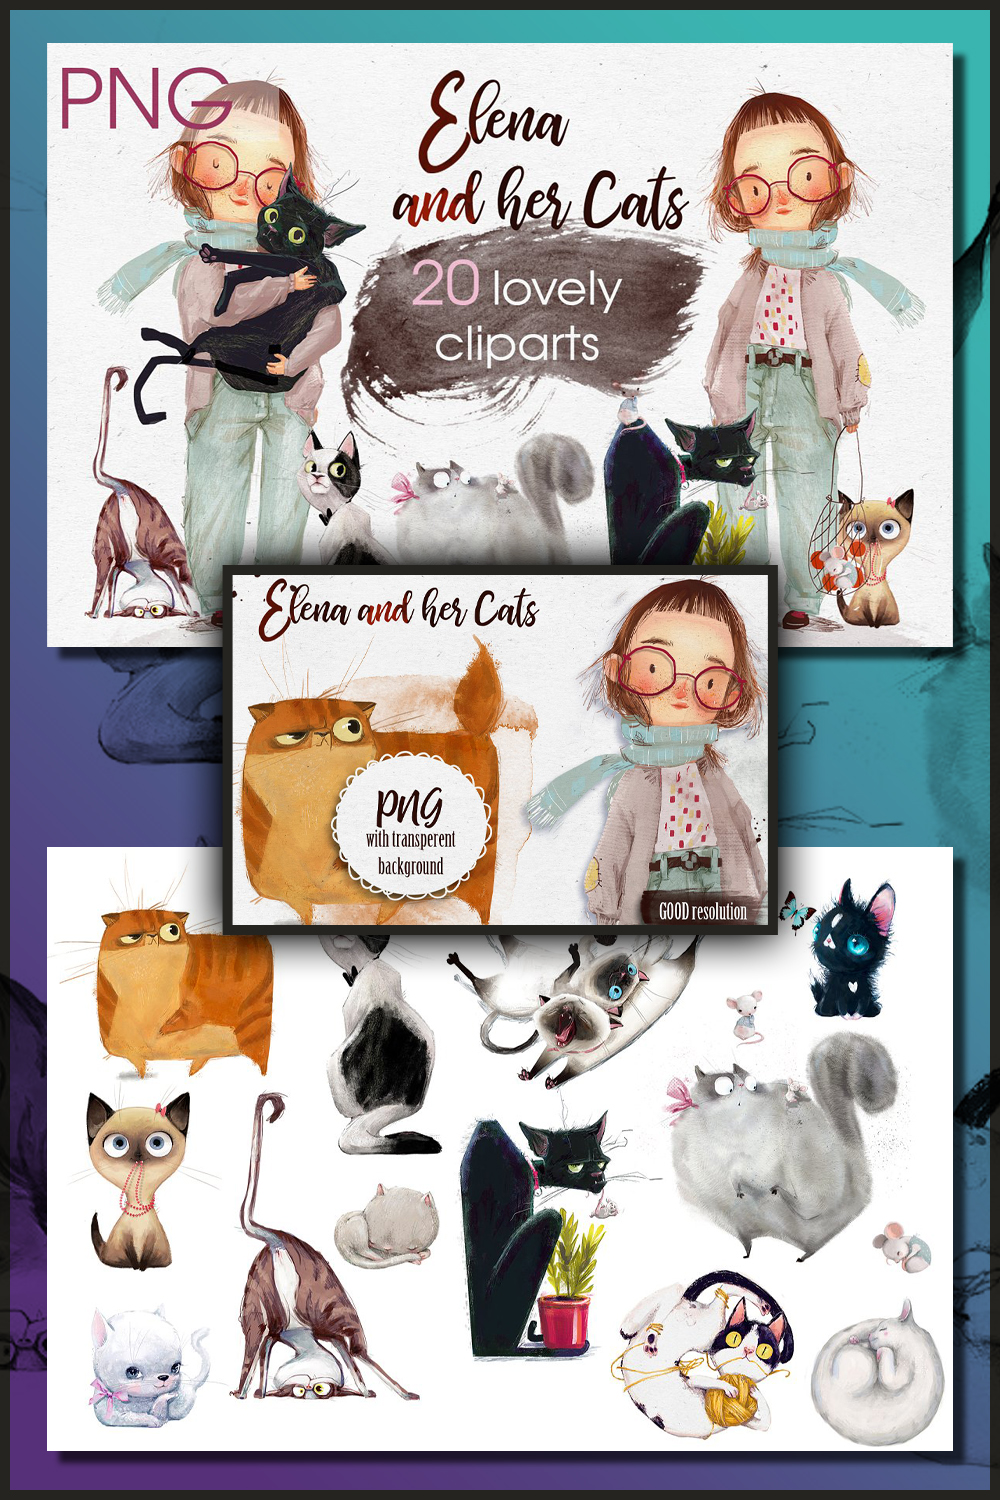 Illustration elena and her cats of pinterest.